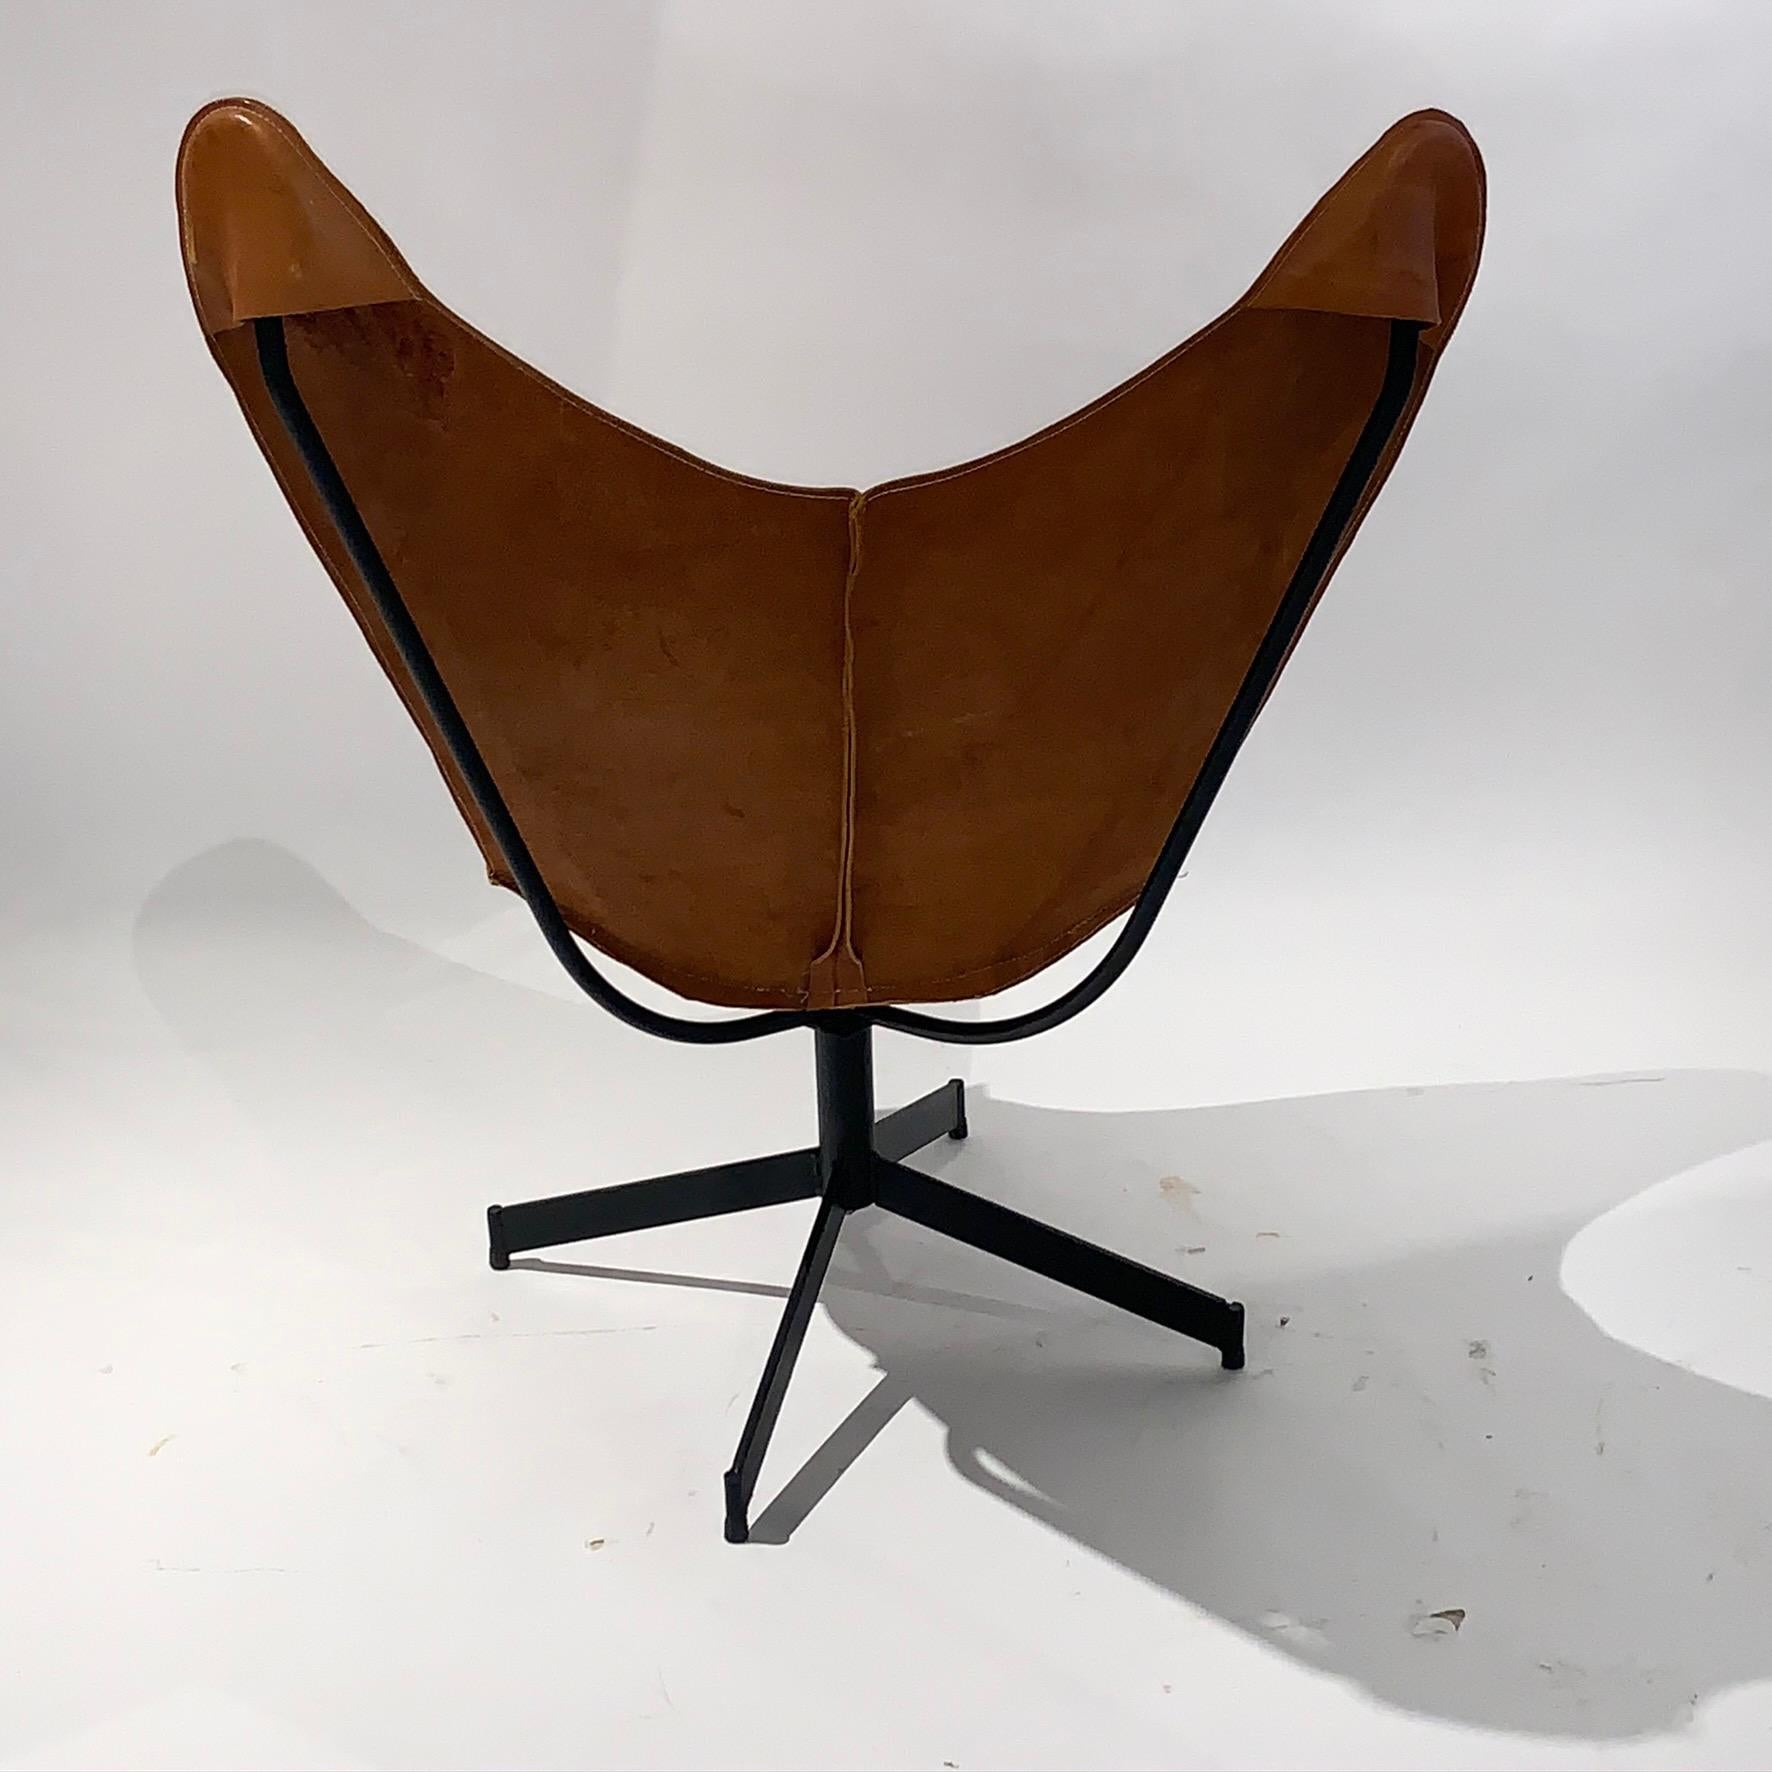 American Rare 1960s William Katavolous Sculptural Leather Swivel Sling Butterfly Chair